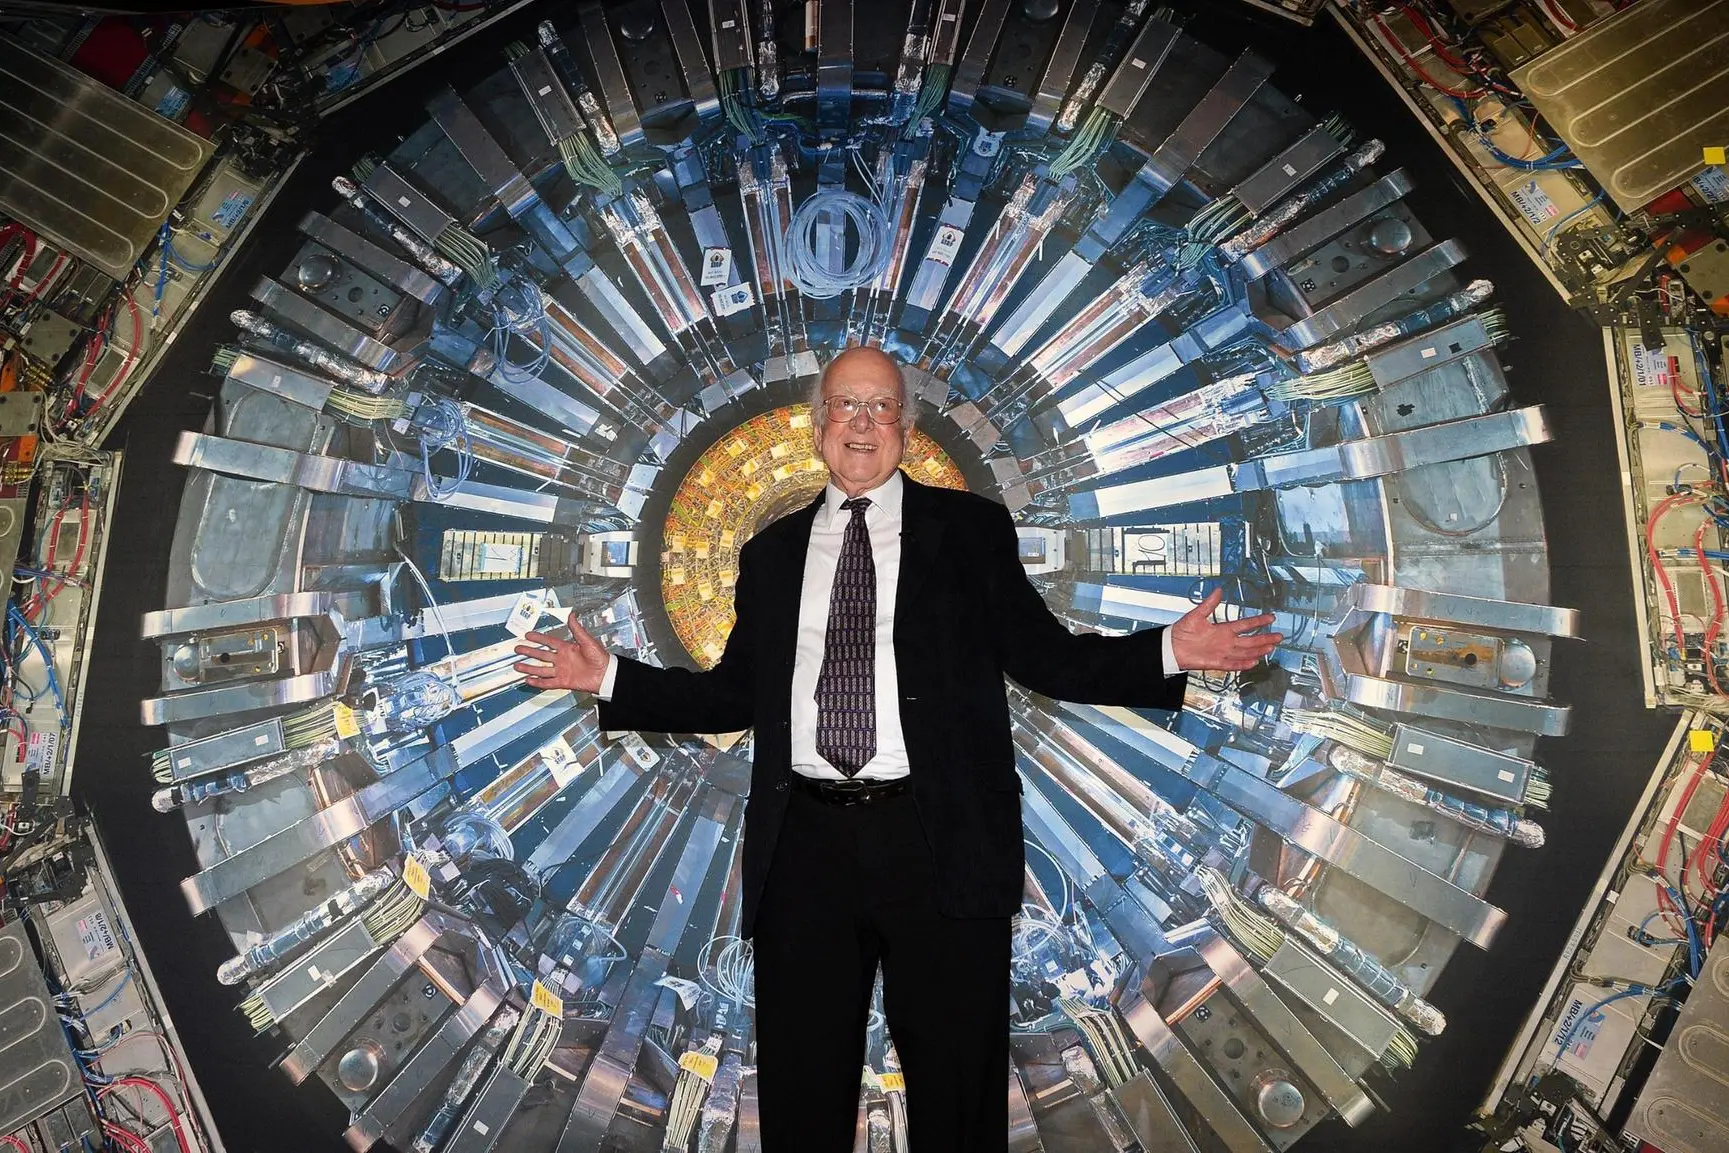 epa03946299 Nobel laureate Peter Higgs poses for photographs during the opening of the Large Hadron Collider exhibition at Science Museum in London, 12 November 2013. The exhibit opens to the public 13 November. EPA/ANDY RAIN